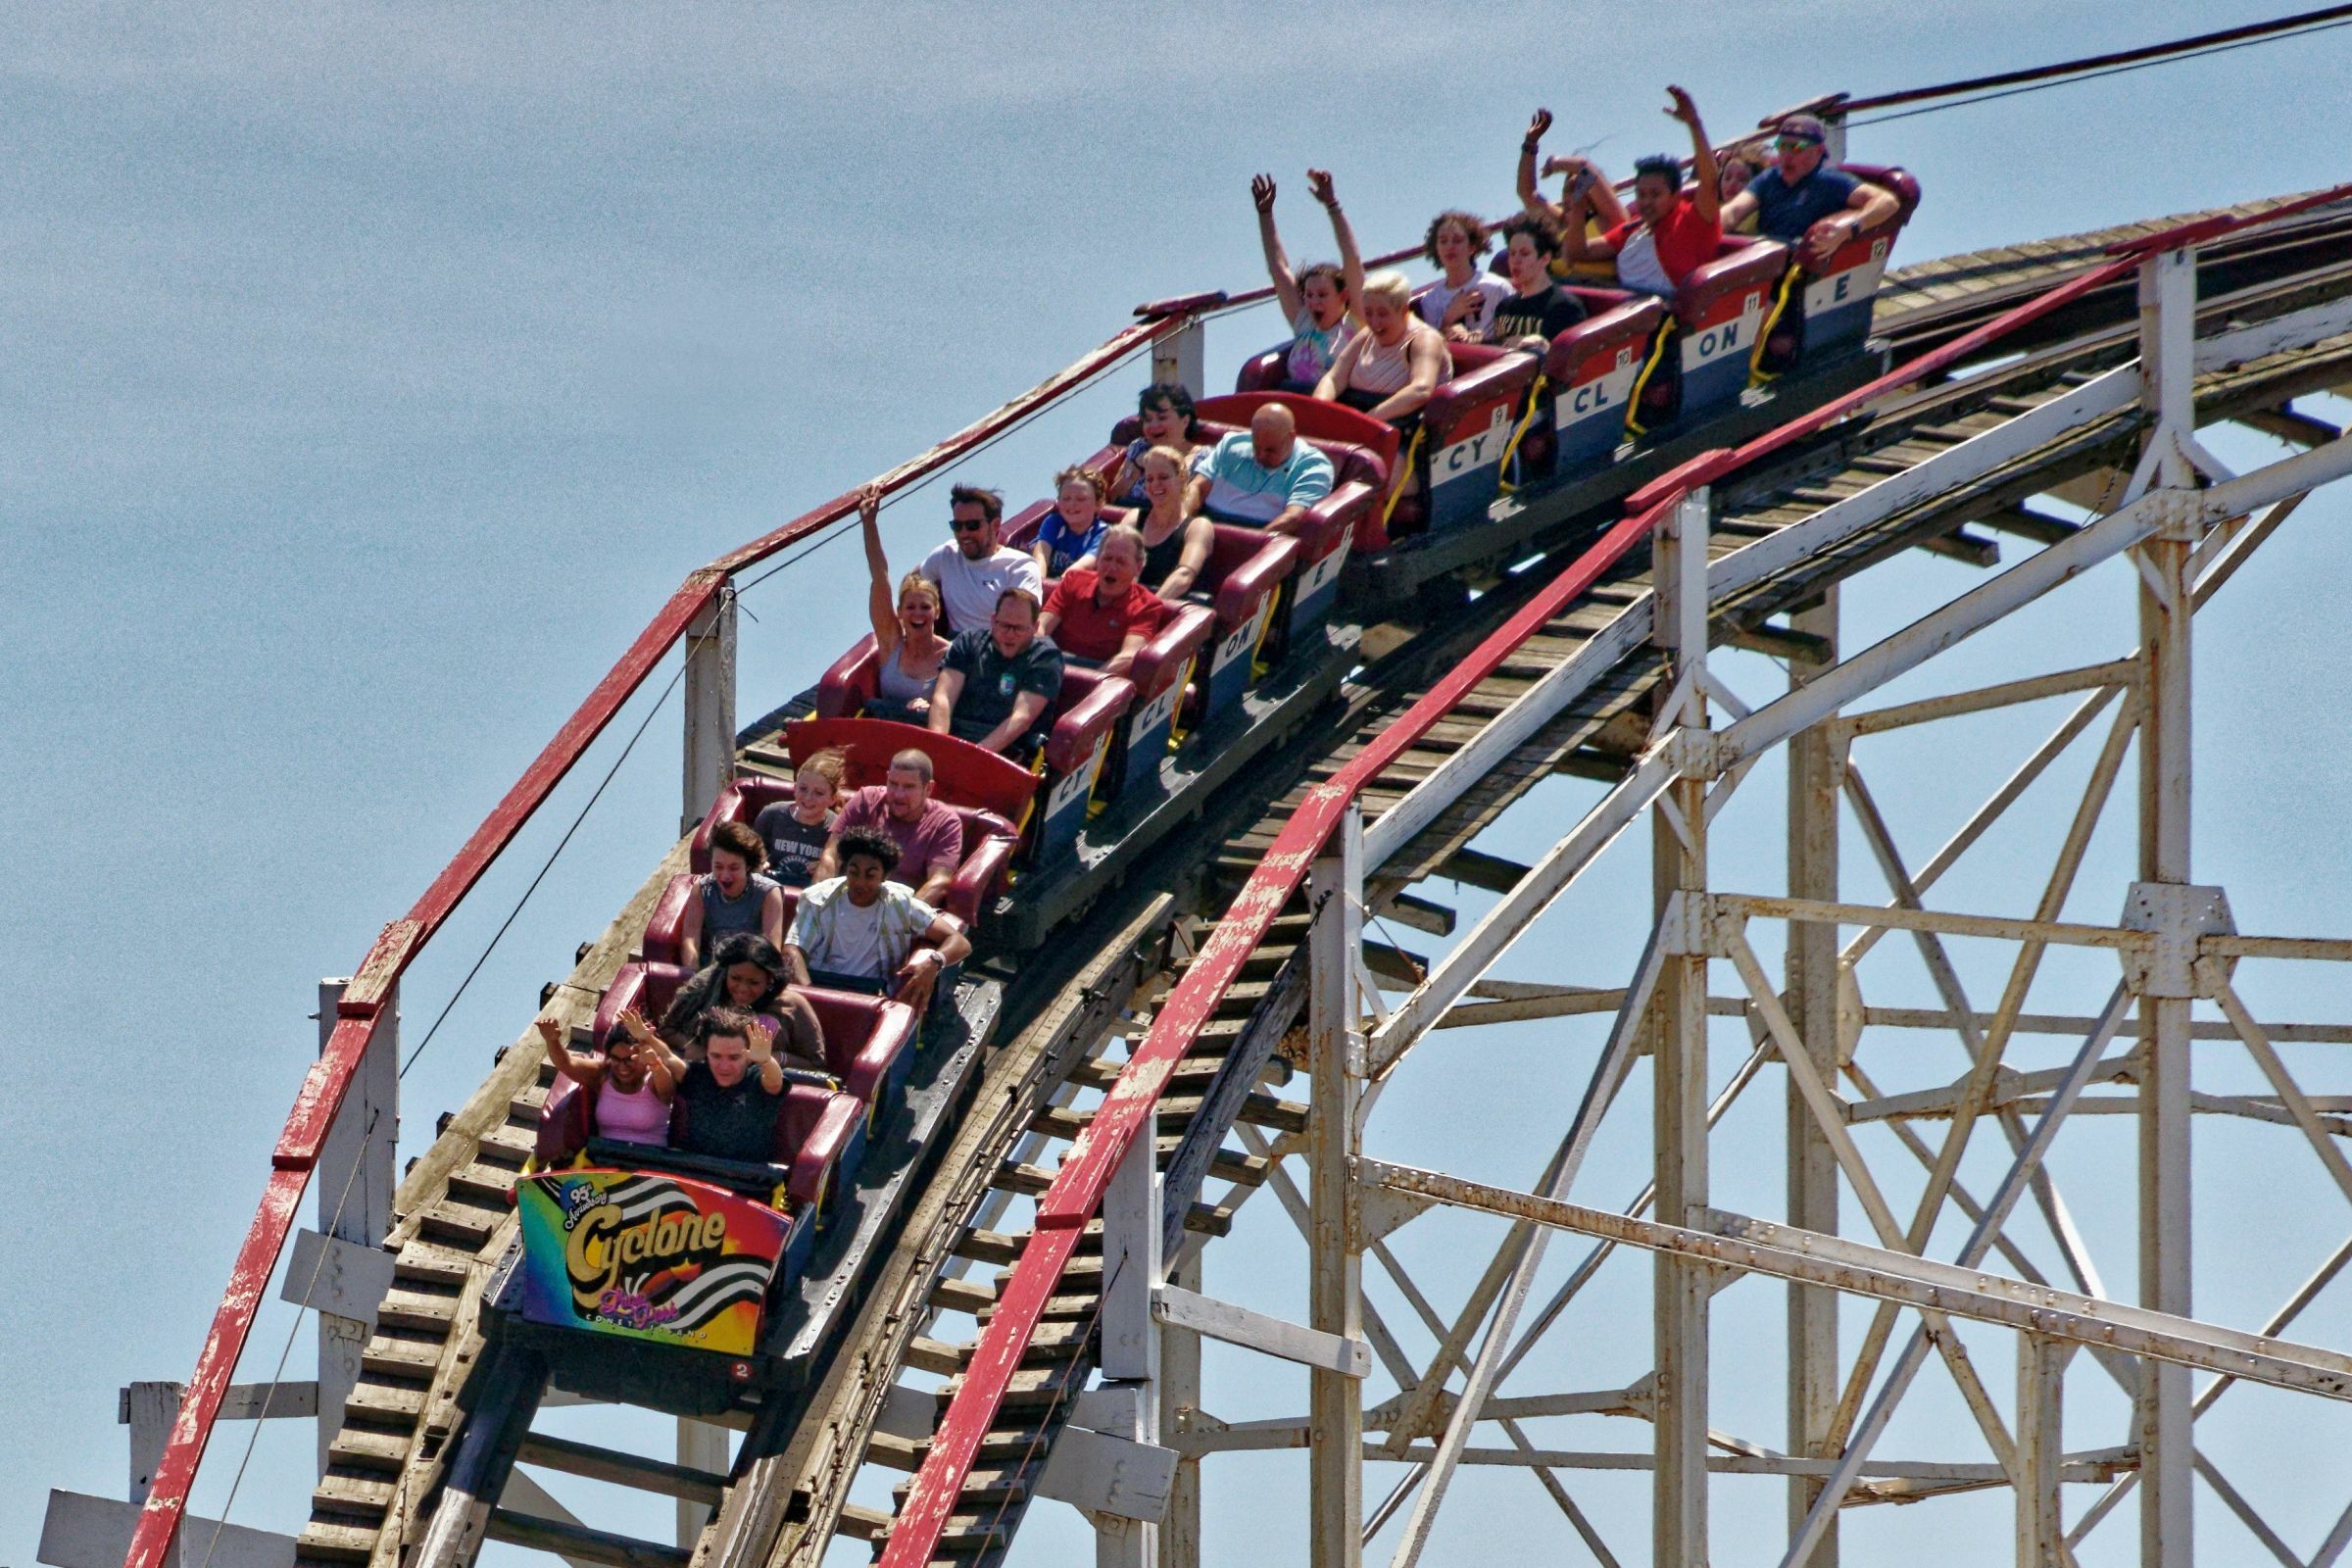 The Coney Island rollercoasters will be open daily starting this weekend